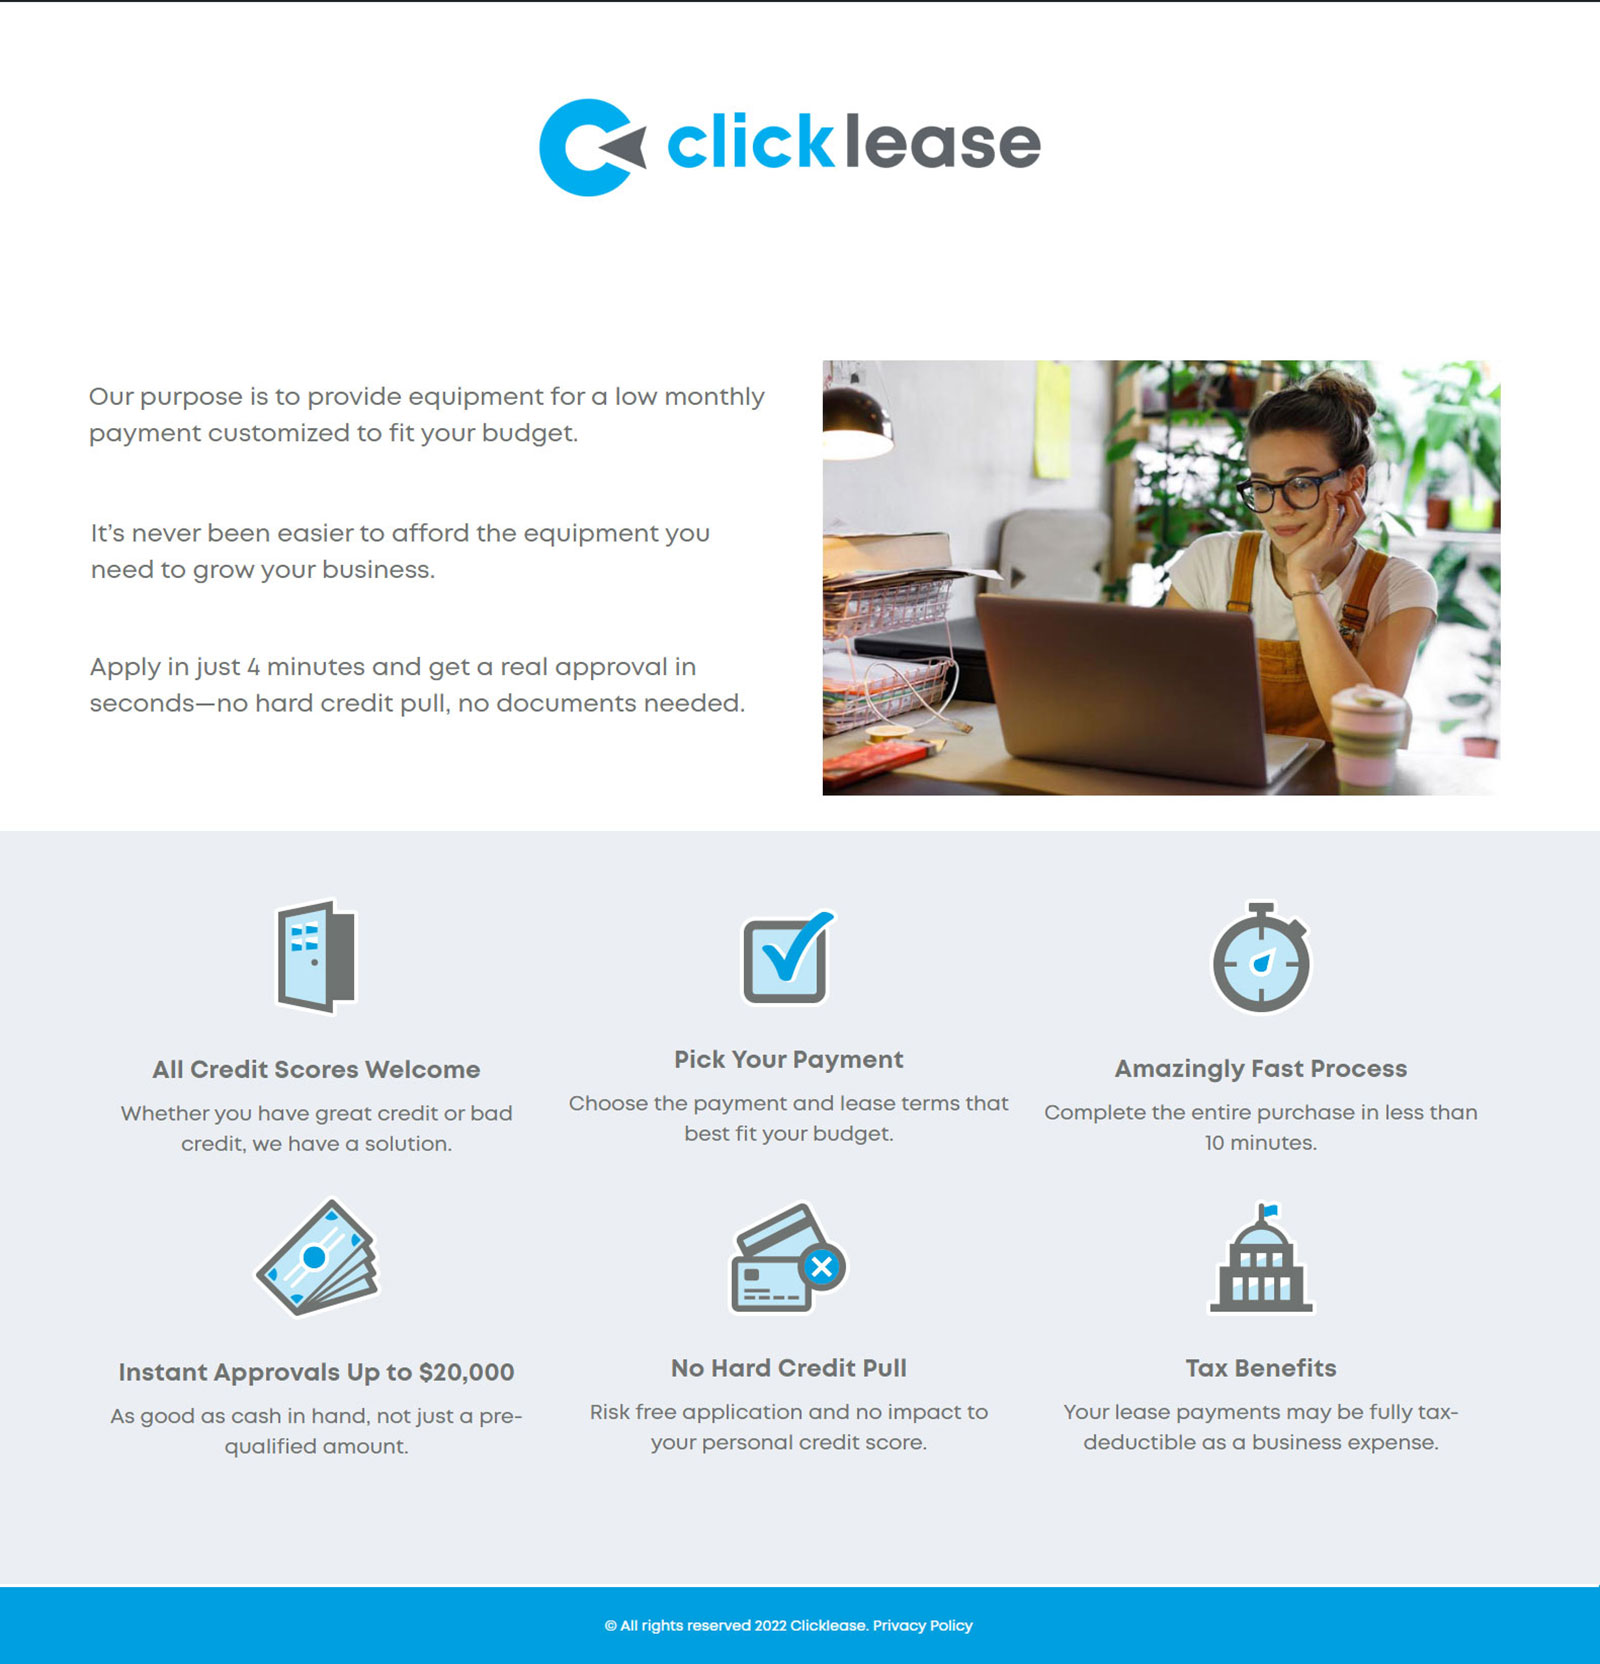 Learn More About Clicklease Financing